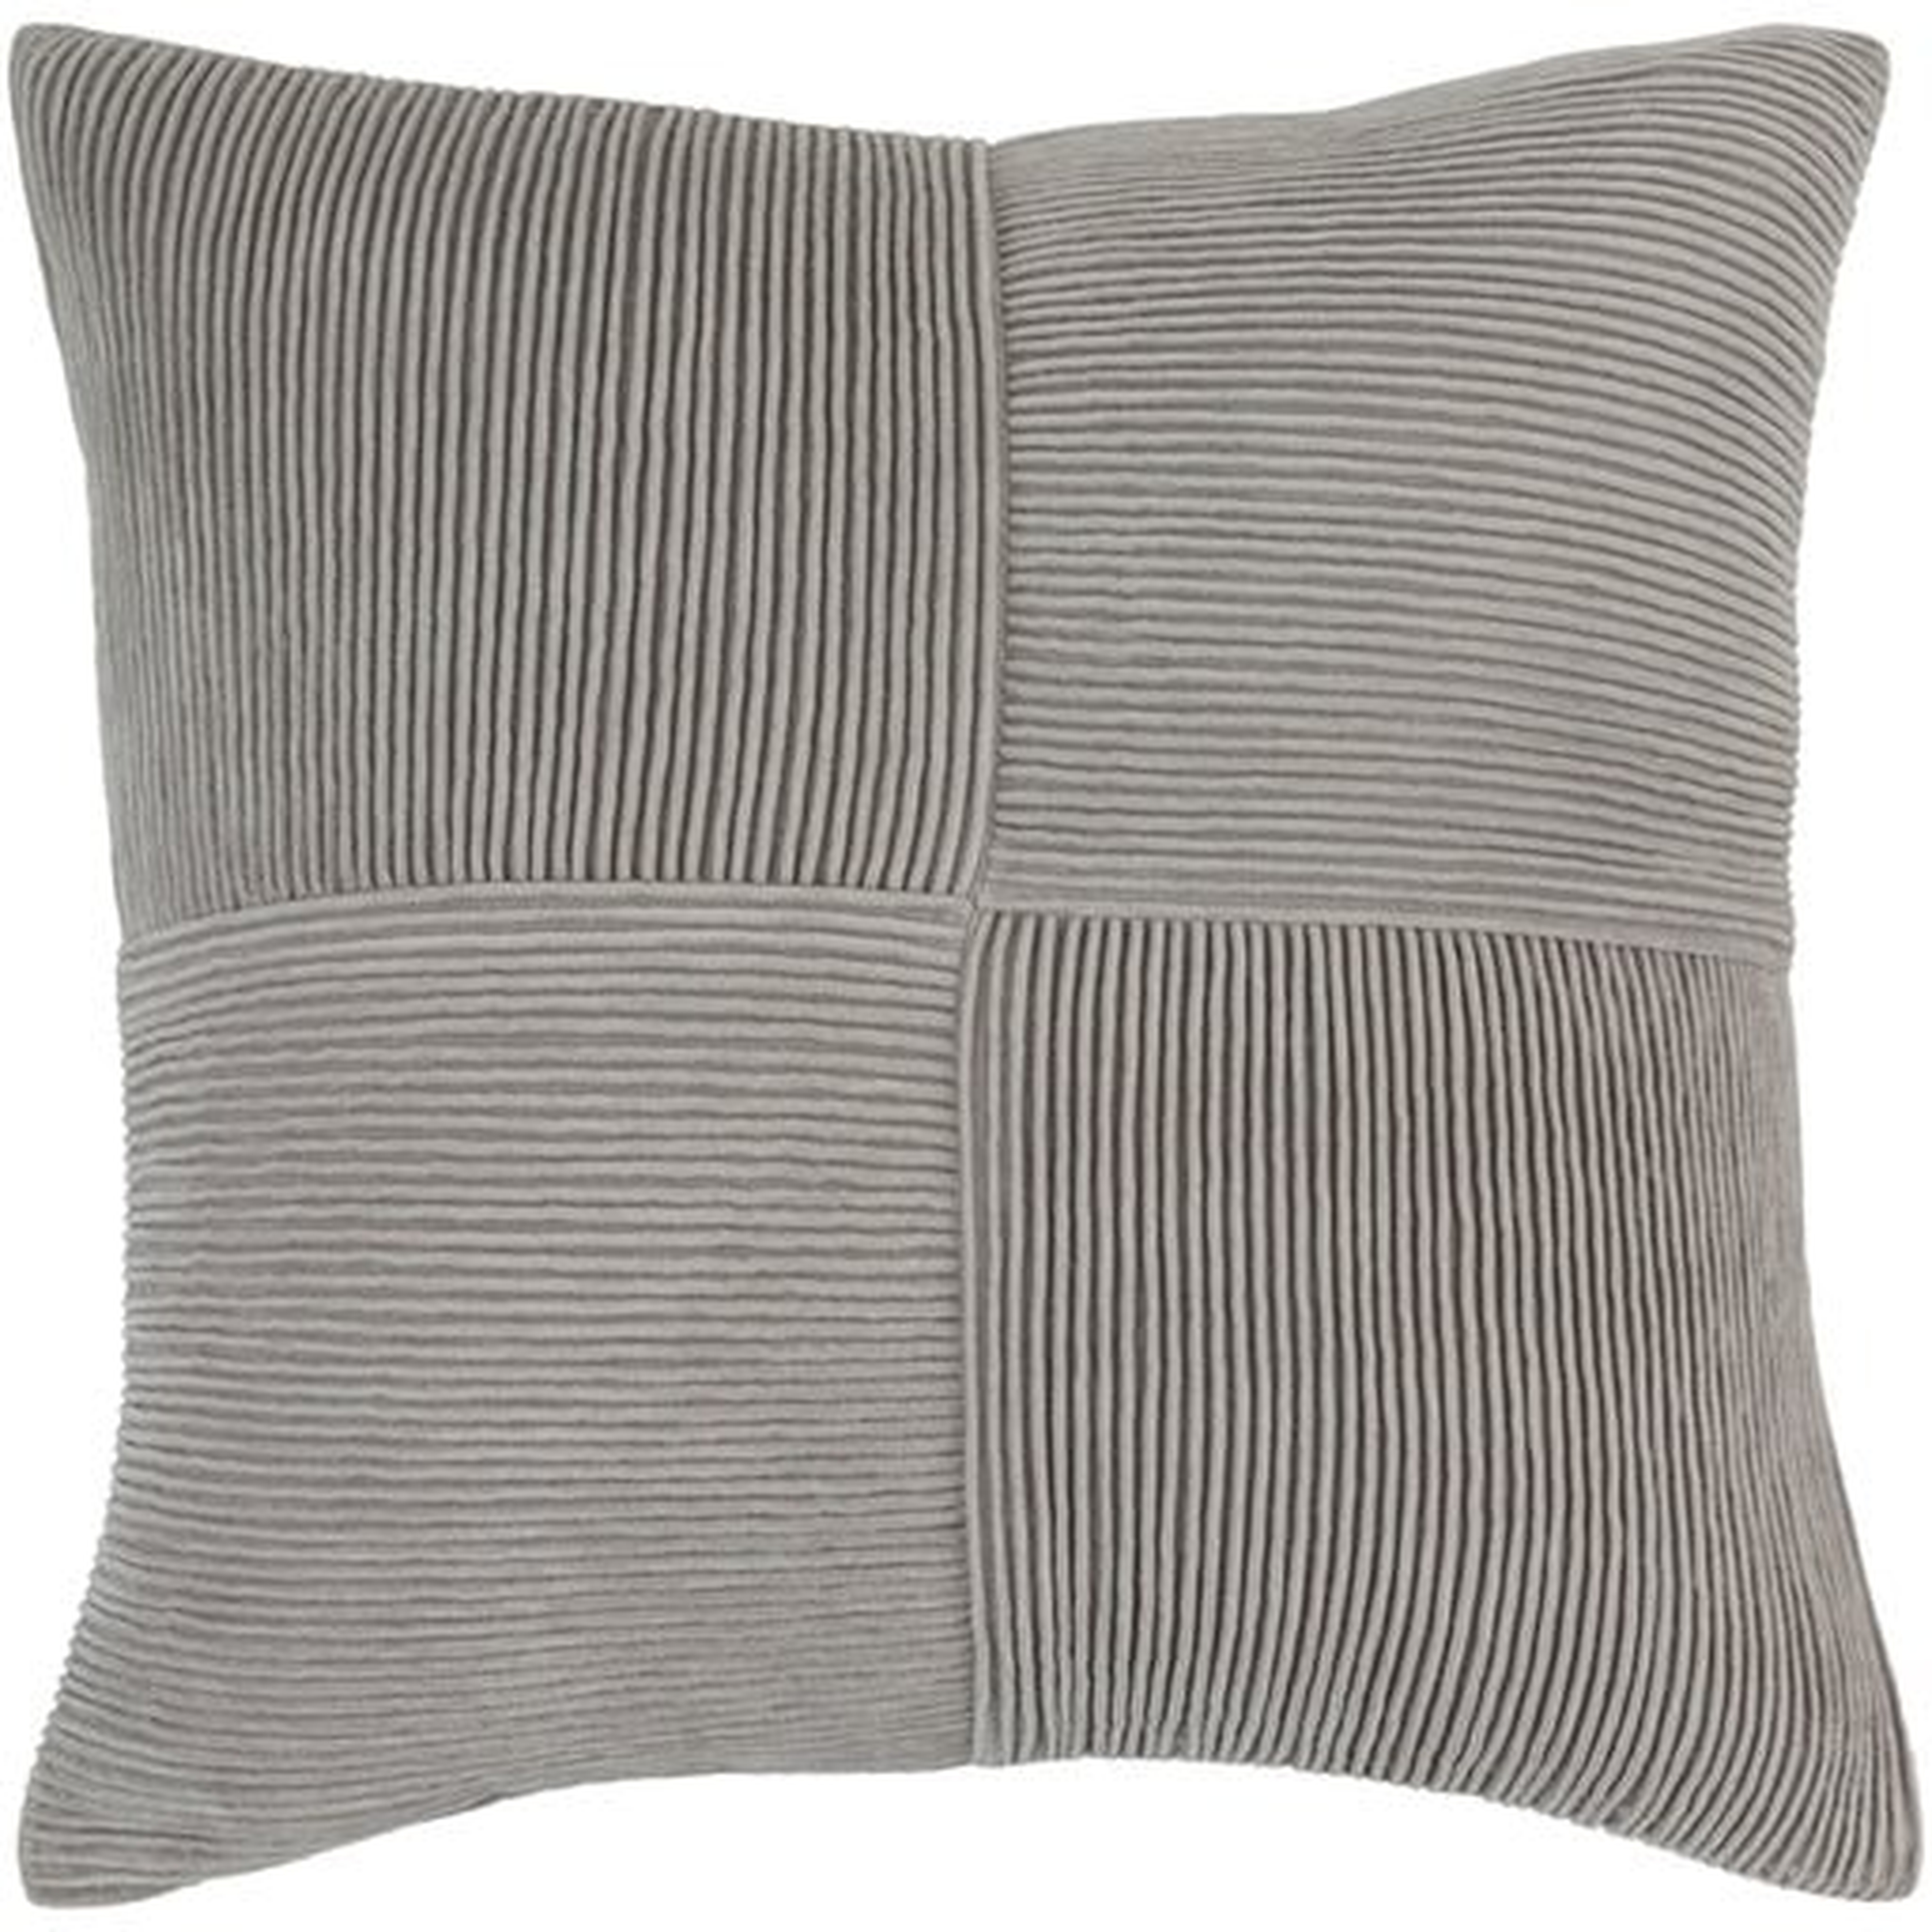 Conrad, 20" Pillow with Down Insert - Surya